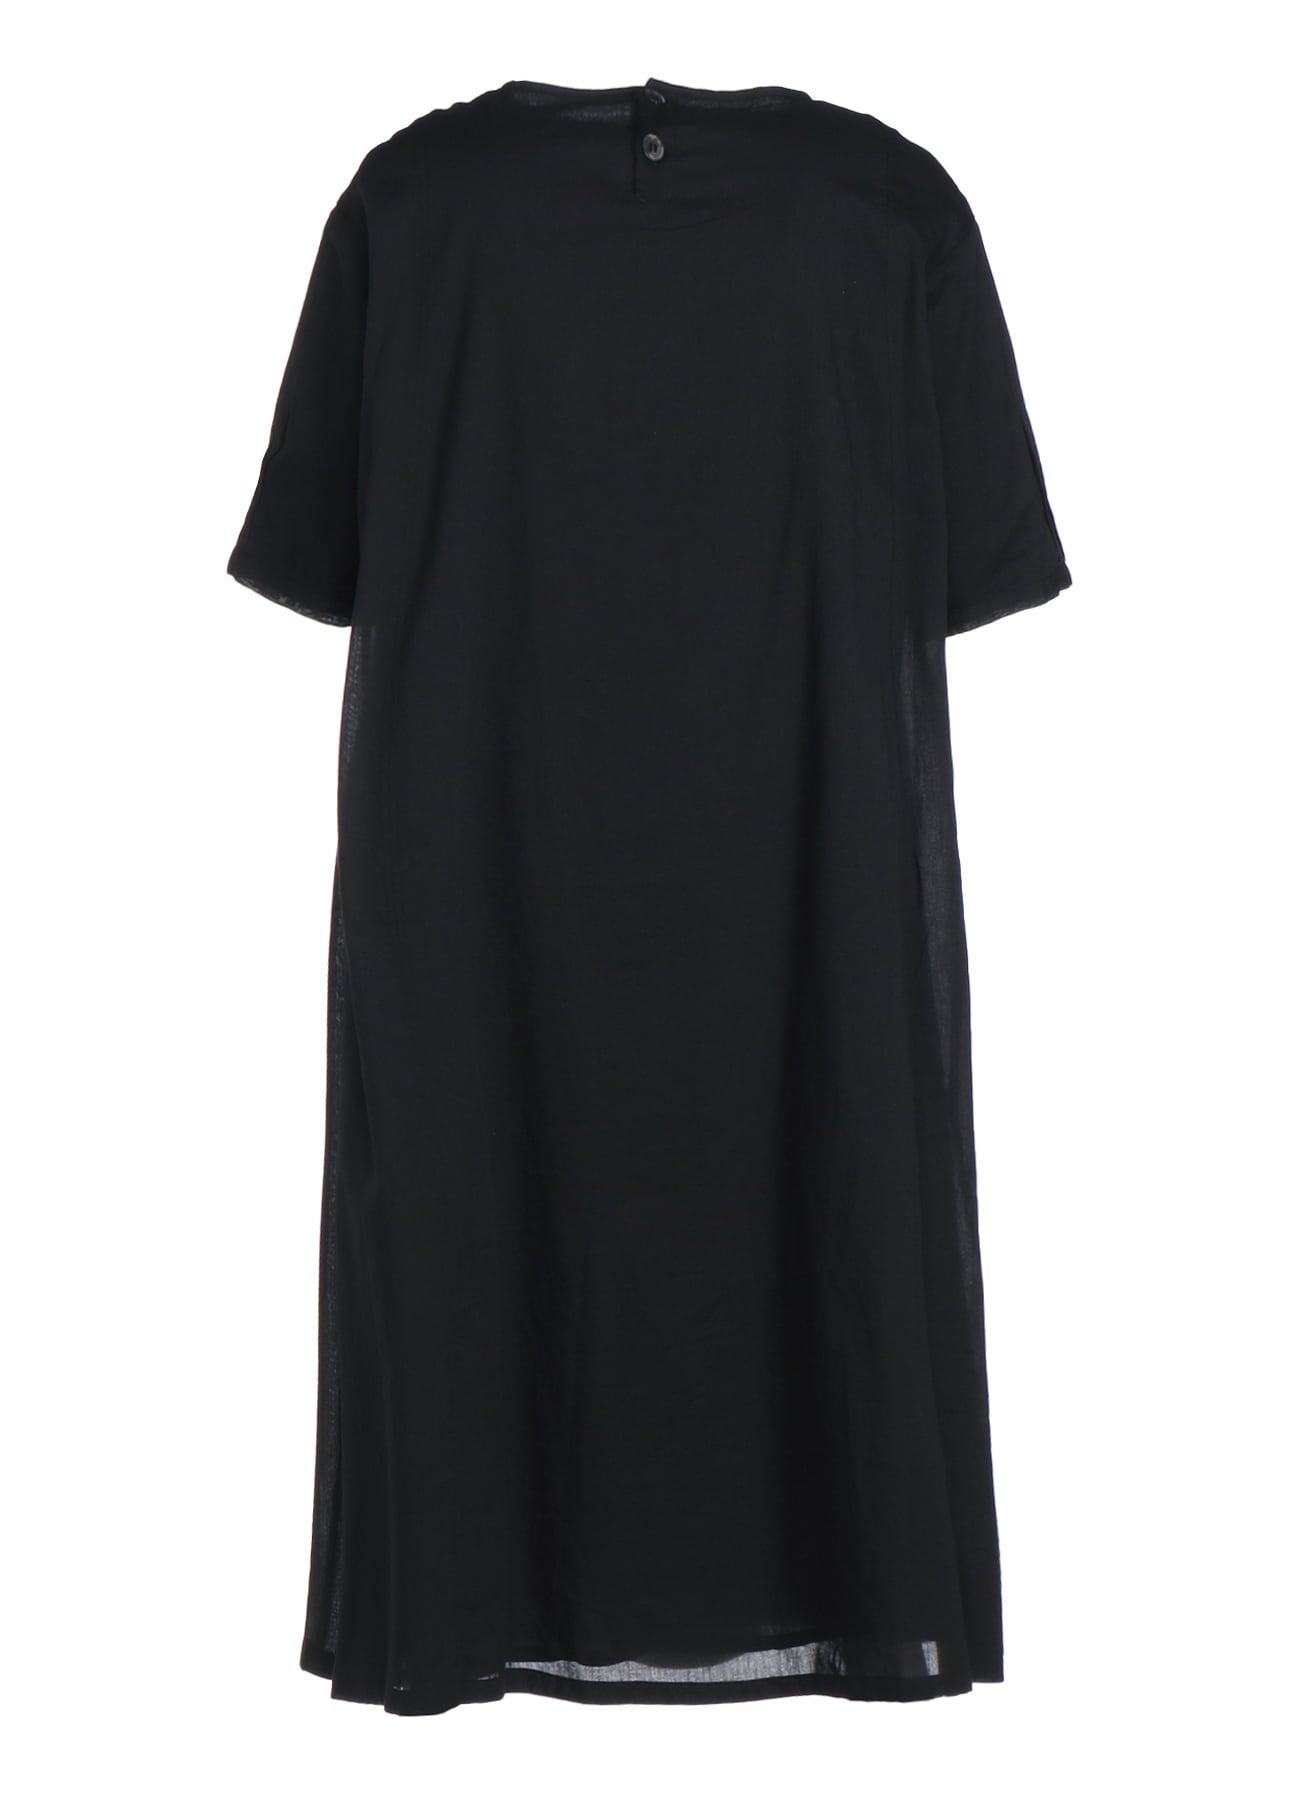 80/1 COTTON VOILE ONE PIECE(FREE SIZE Black): Y's for living｜THE 